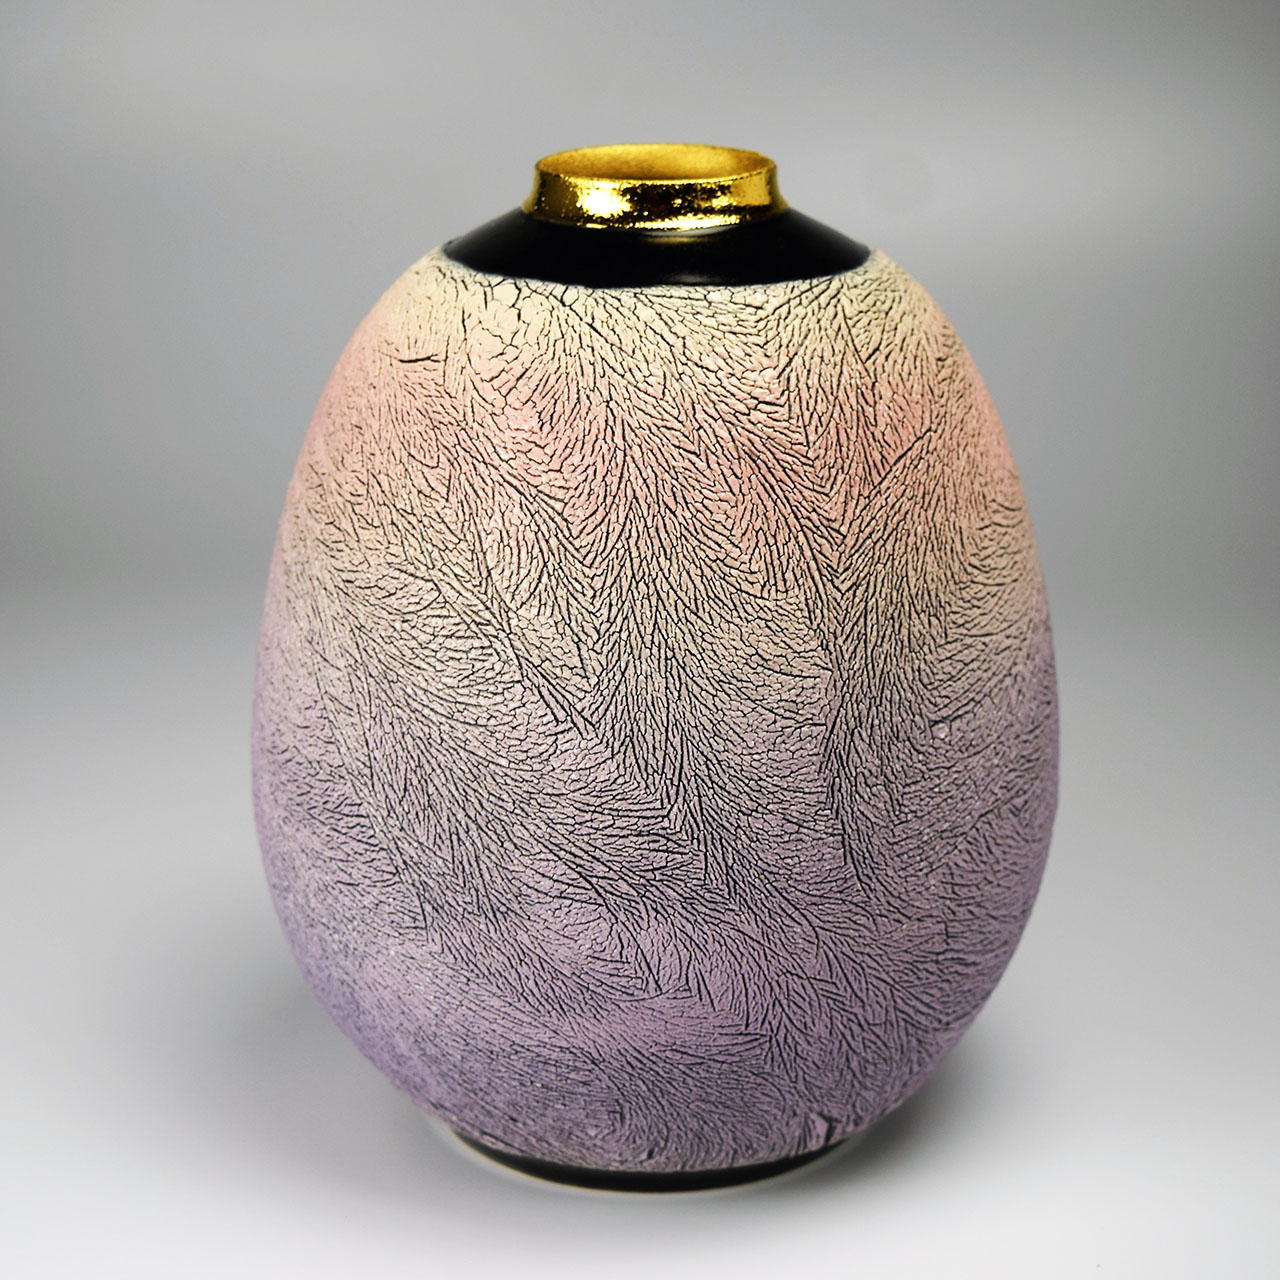 Flower vessel with ice-flowing colored gold design/Shuji Yanagibashi